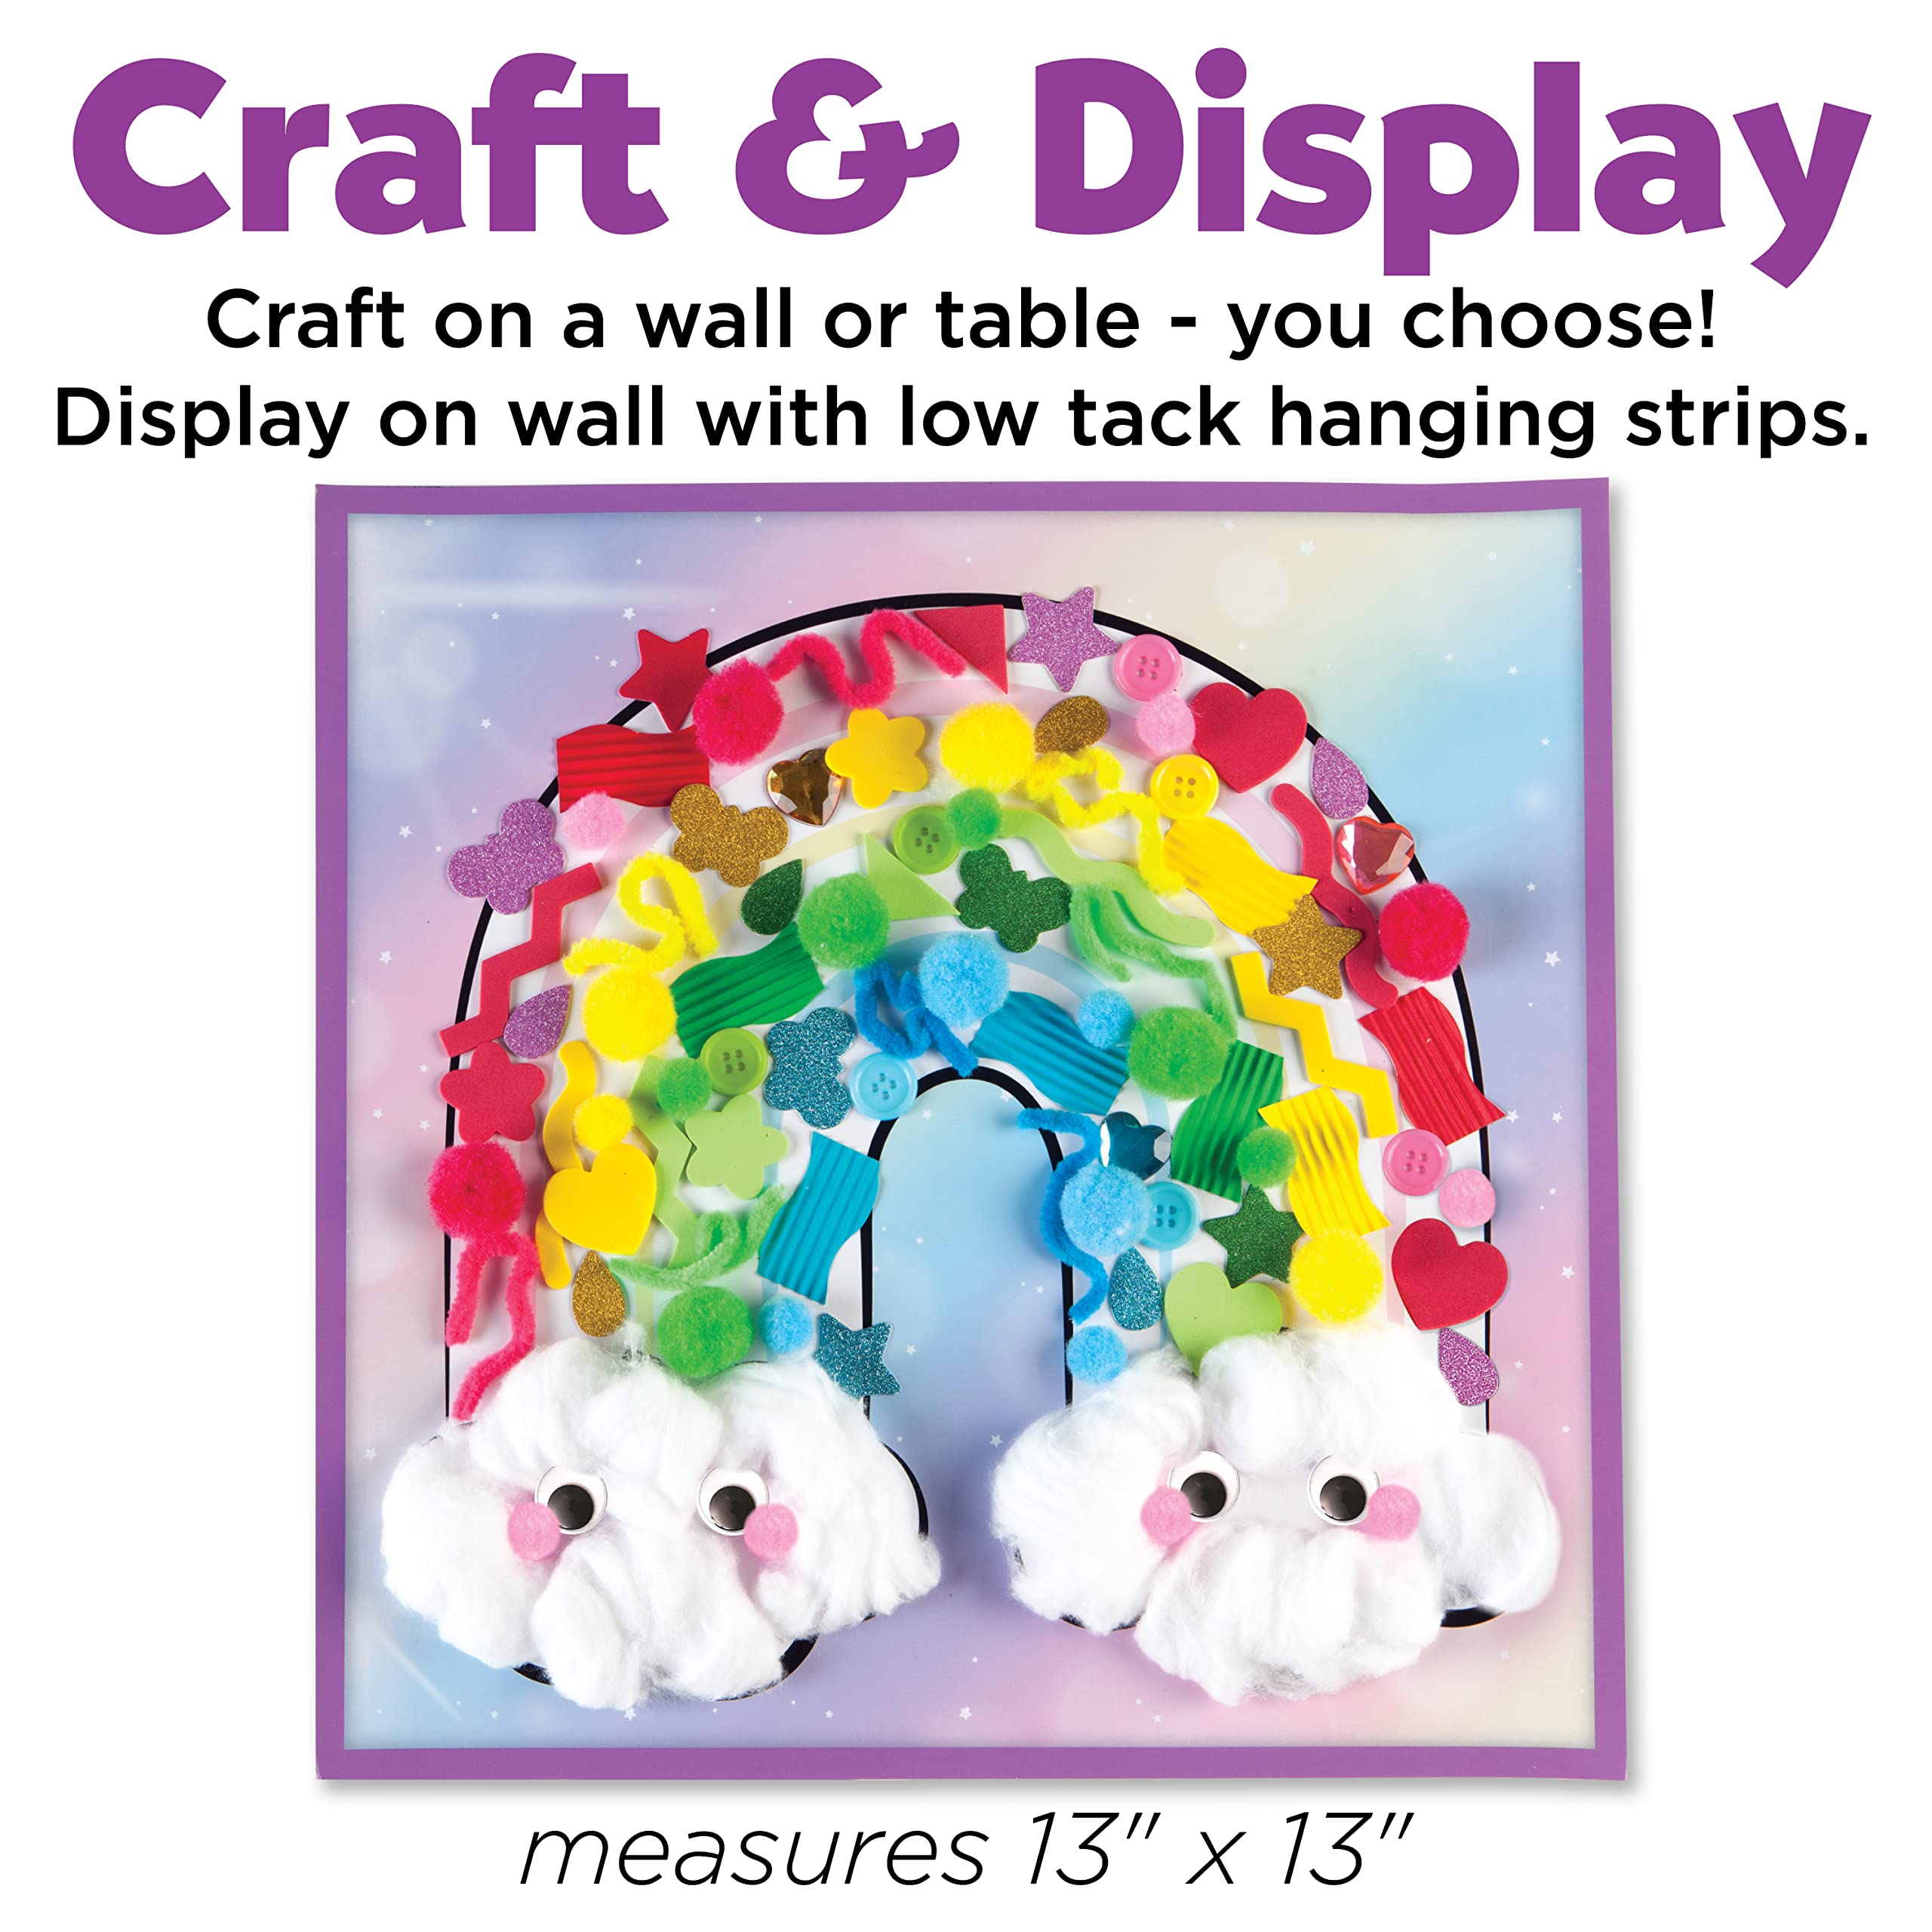 Creativity for Kids Sticky Wall Art: Rainbow - Easter Gifts for Toddlers, Sensory Toys for Toddlers 3-4+, Preschool Learning Toys